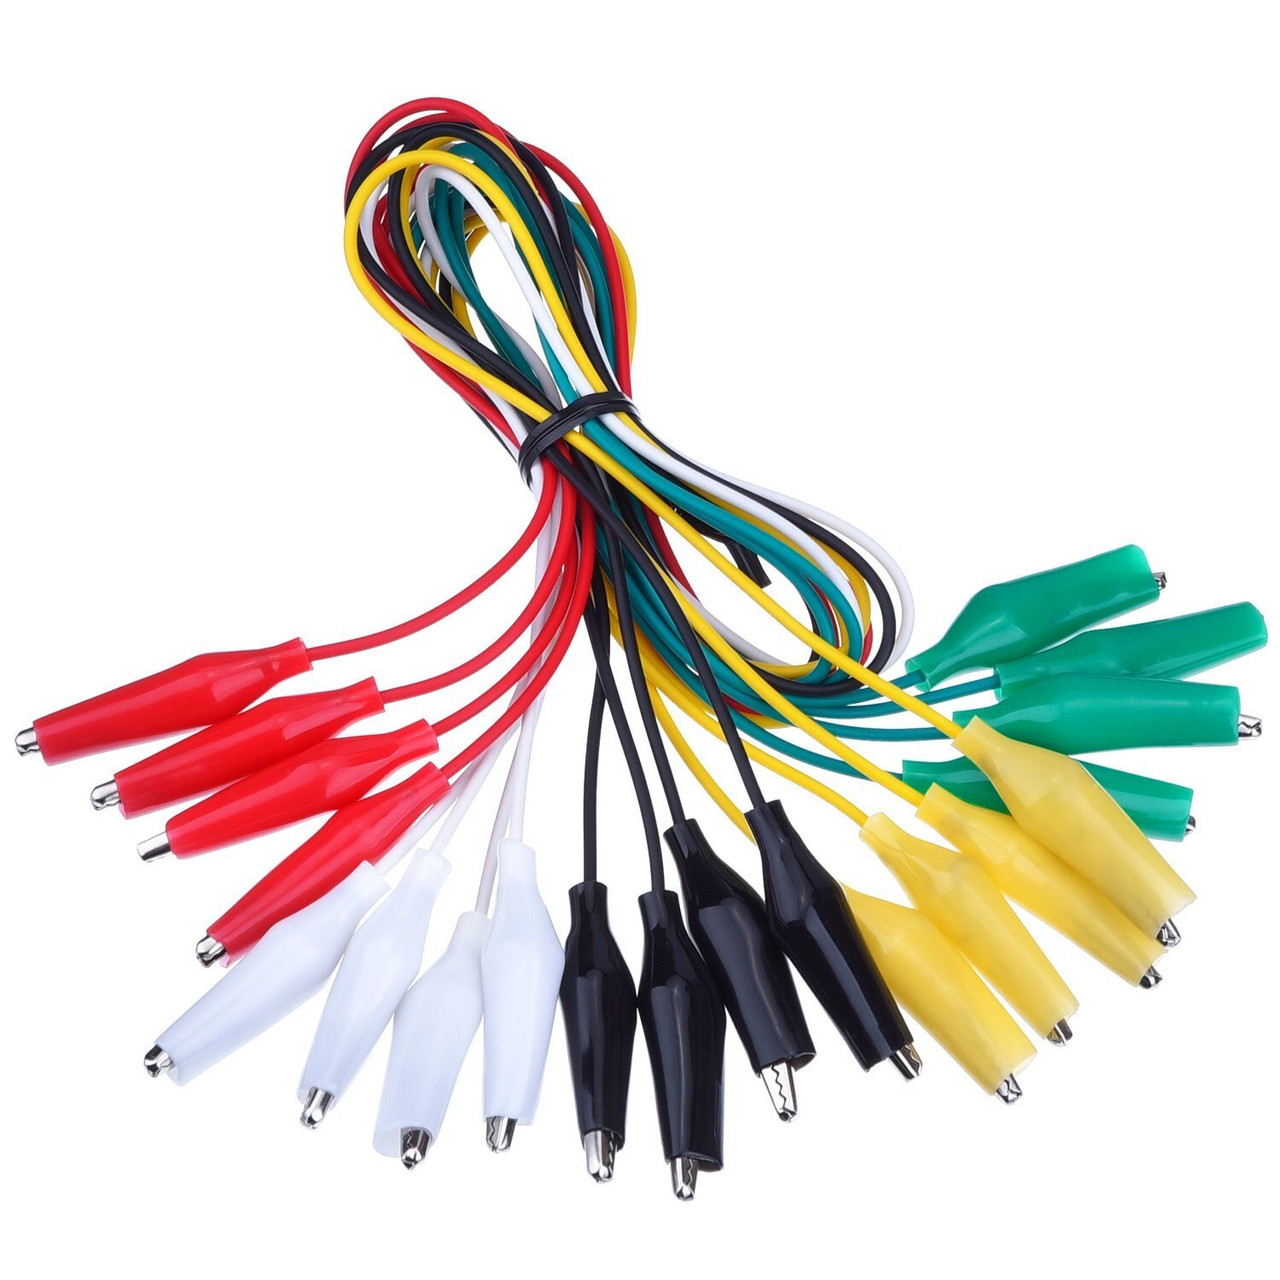 10x 10pc Meter Colored Insulating Test Lead Cable Double Ended Alligator Clips 